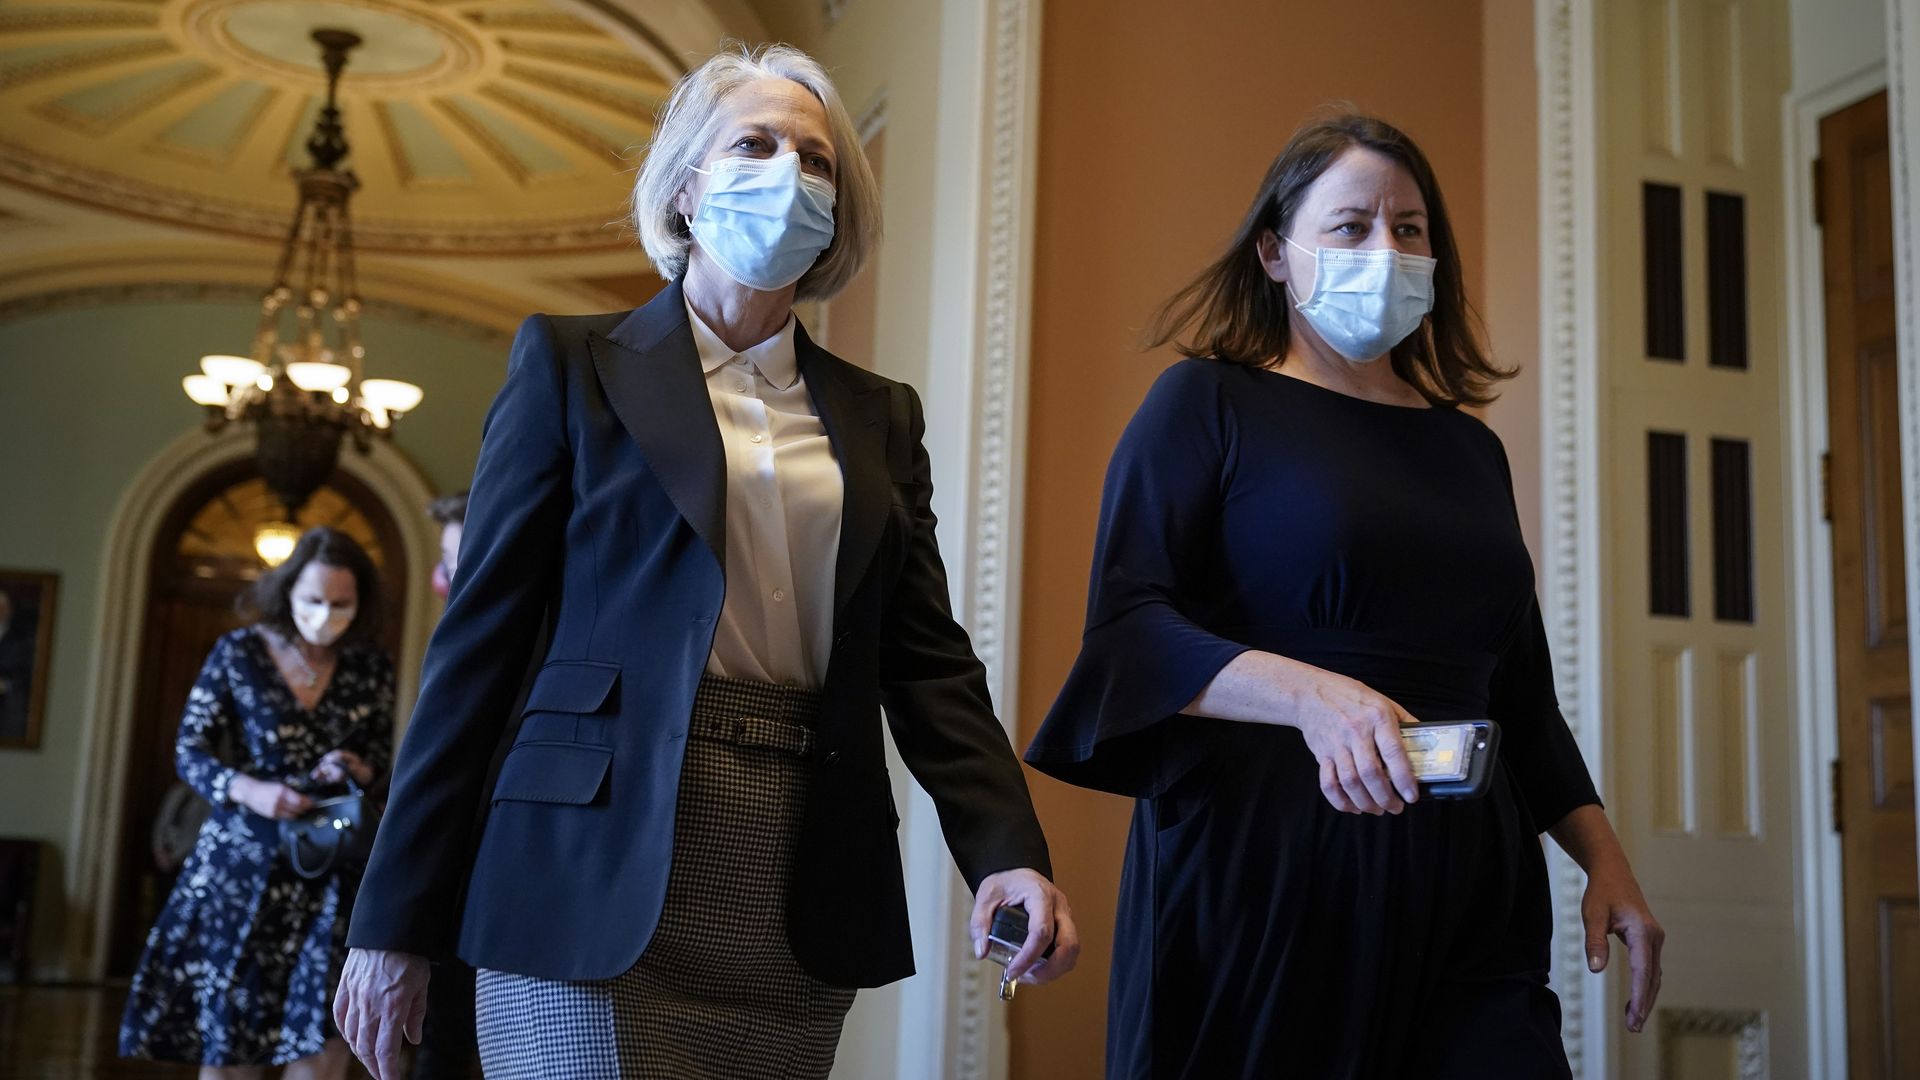 New Sergeant at Arms of the United States Senate Karen Gibson is seen walking with her chief of staff, Jennifer Hemingway.